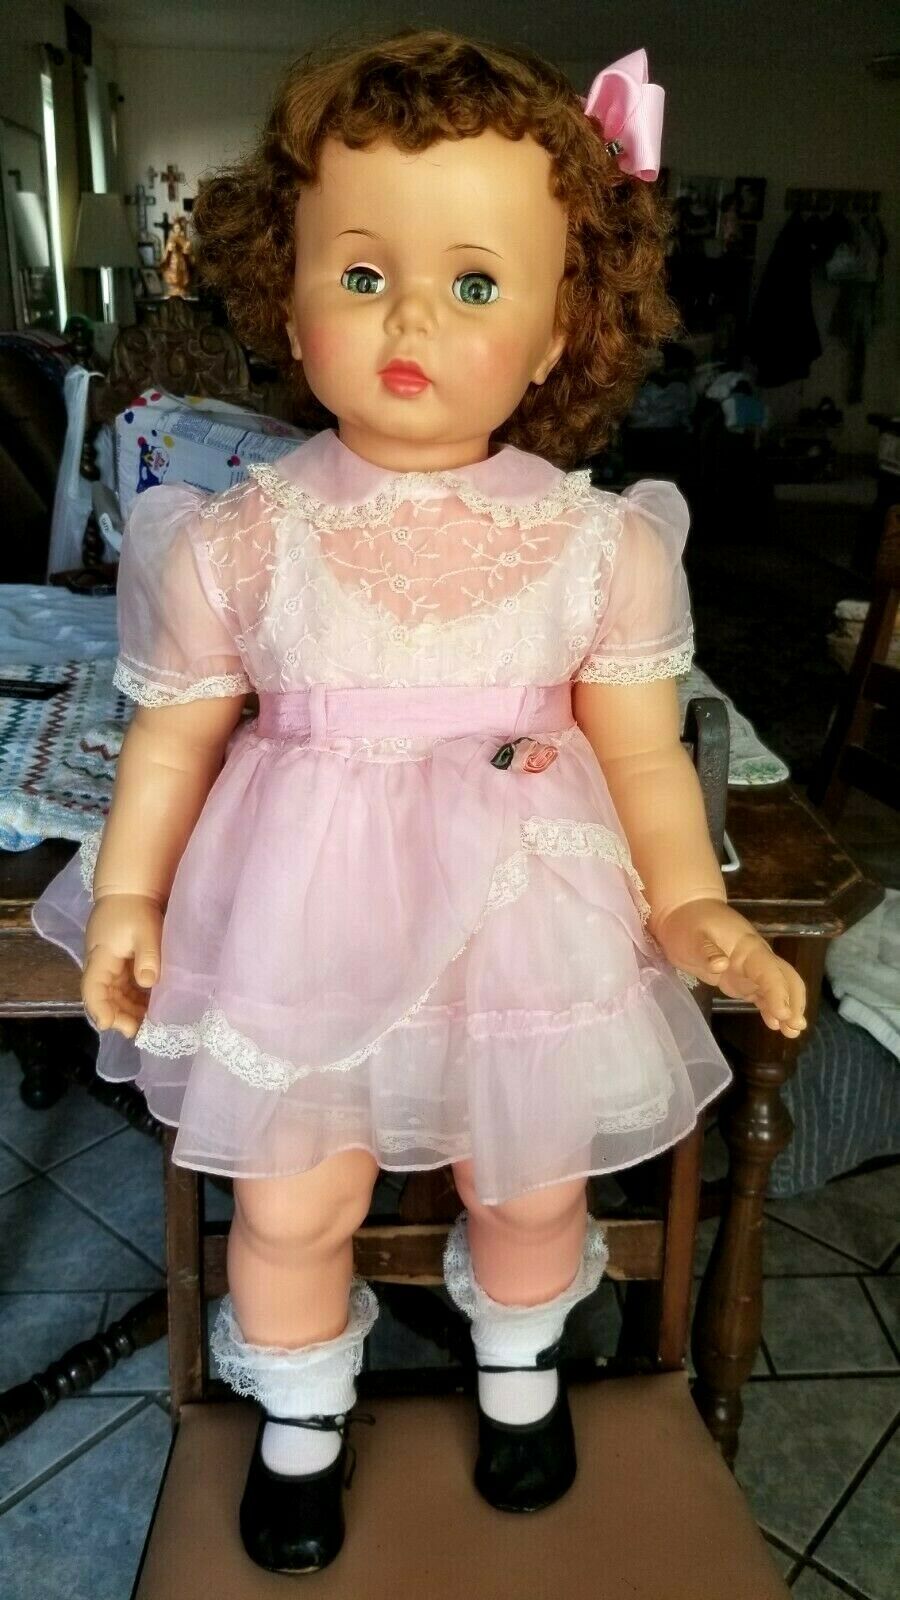 Ideal Doll A Beautiful Penny Playpal Vintage 1959 Doll 32inch Vinyl Companion.